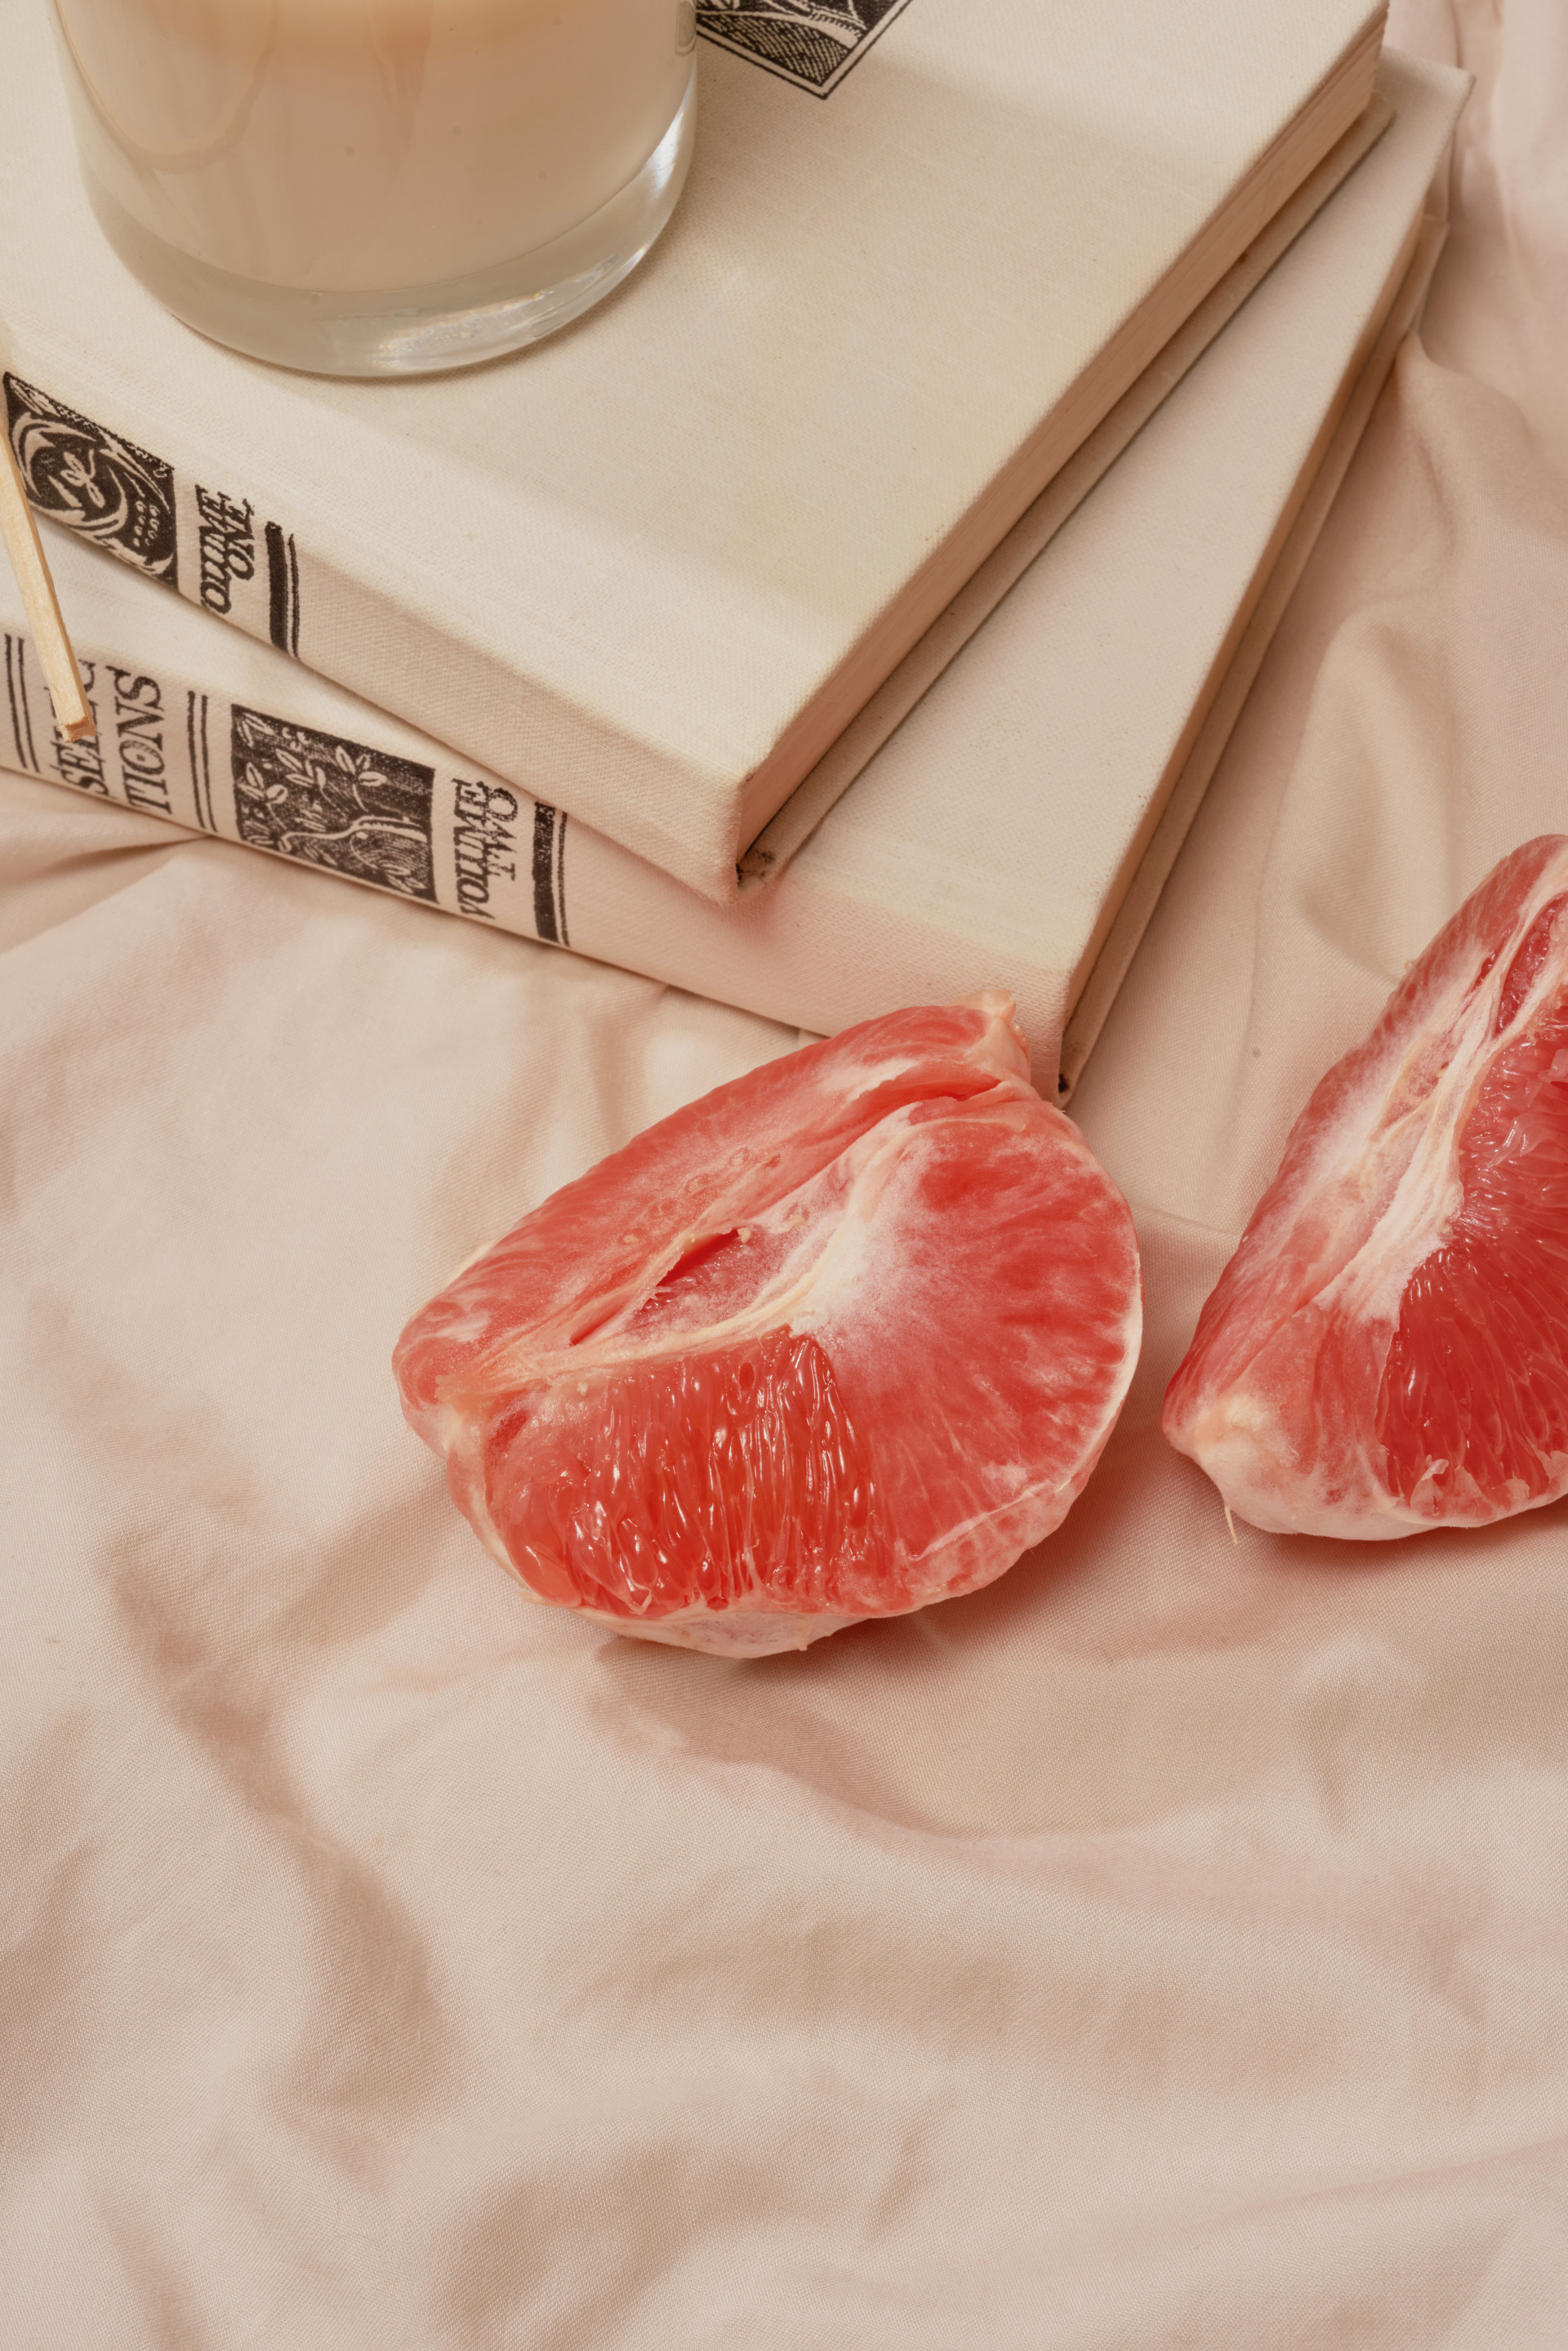 Riped grapefruit slices sits on bed sheets near books before bedtime.